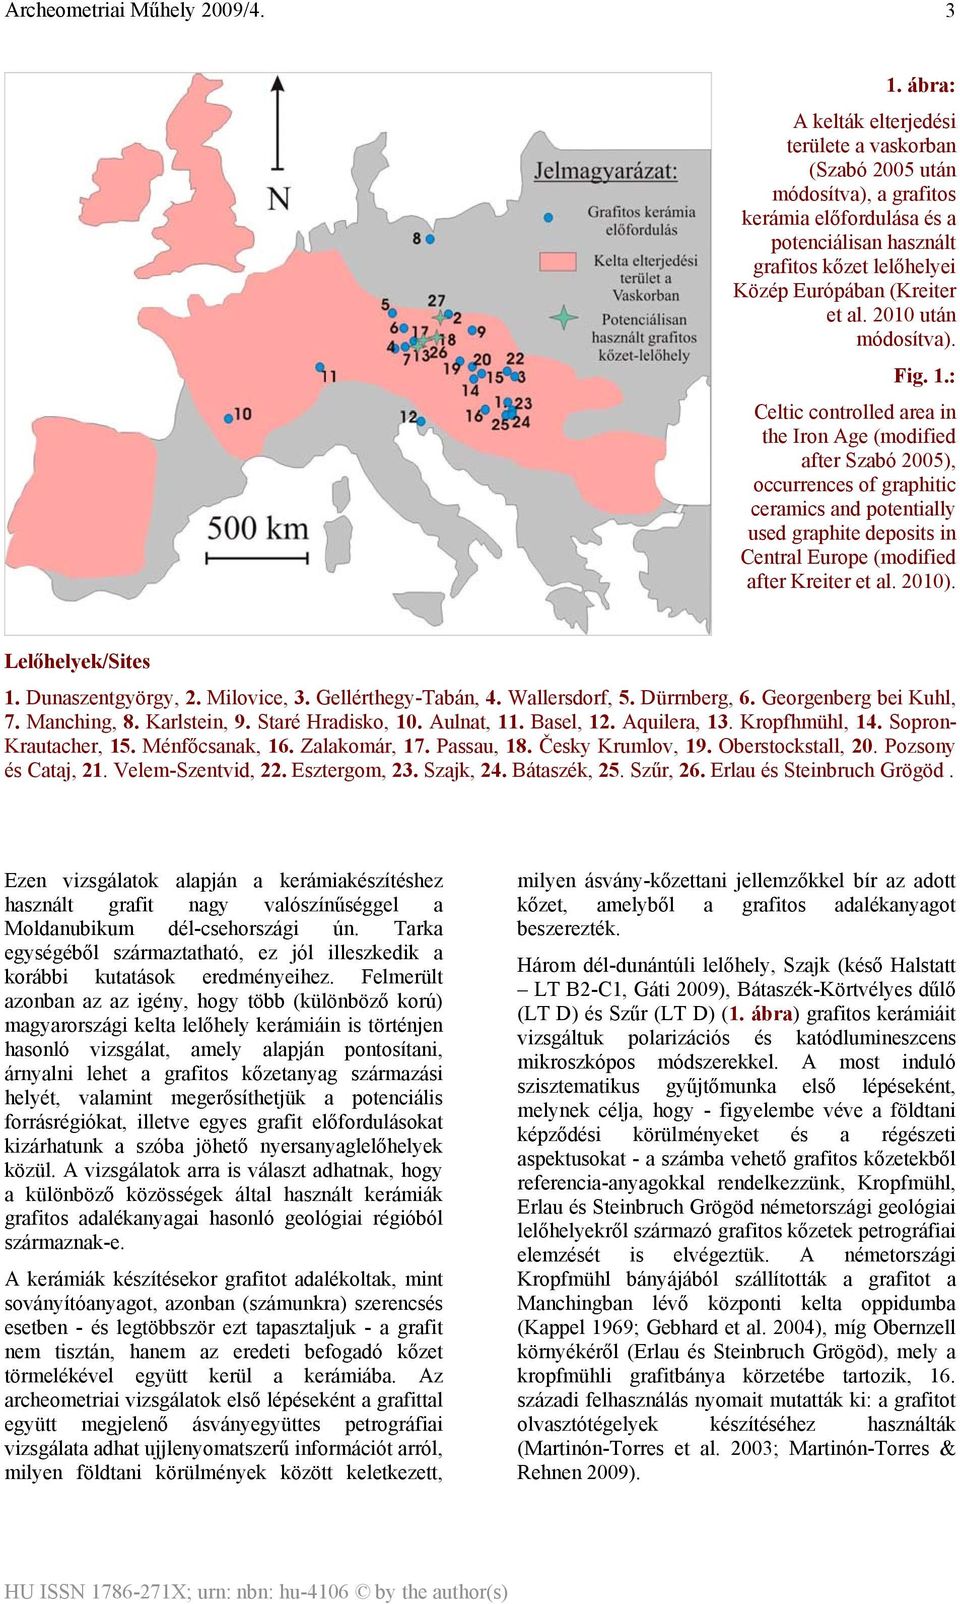 : Celtic controlled area in the Iron Age (modified after Szabó 2005), occurrences of graphitic ceramics and potentially used graphite deposits in Central Europe (modified after Kreiter et al. 2010).